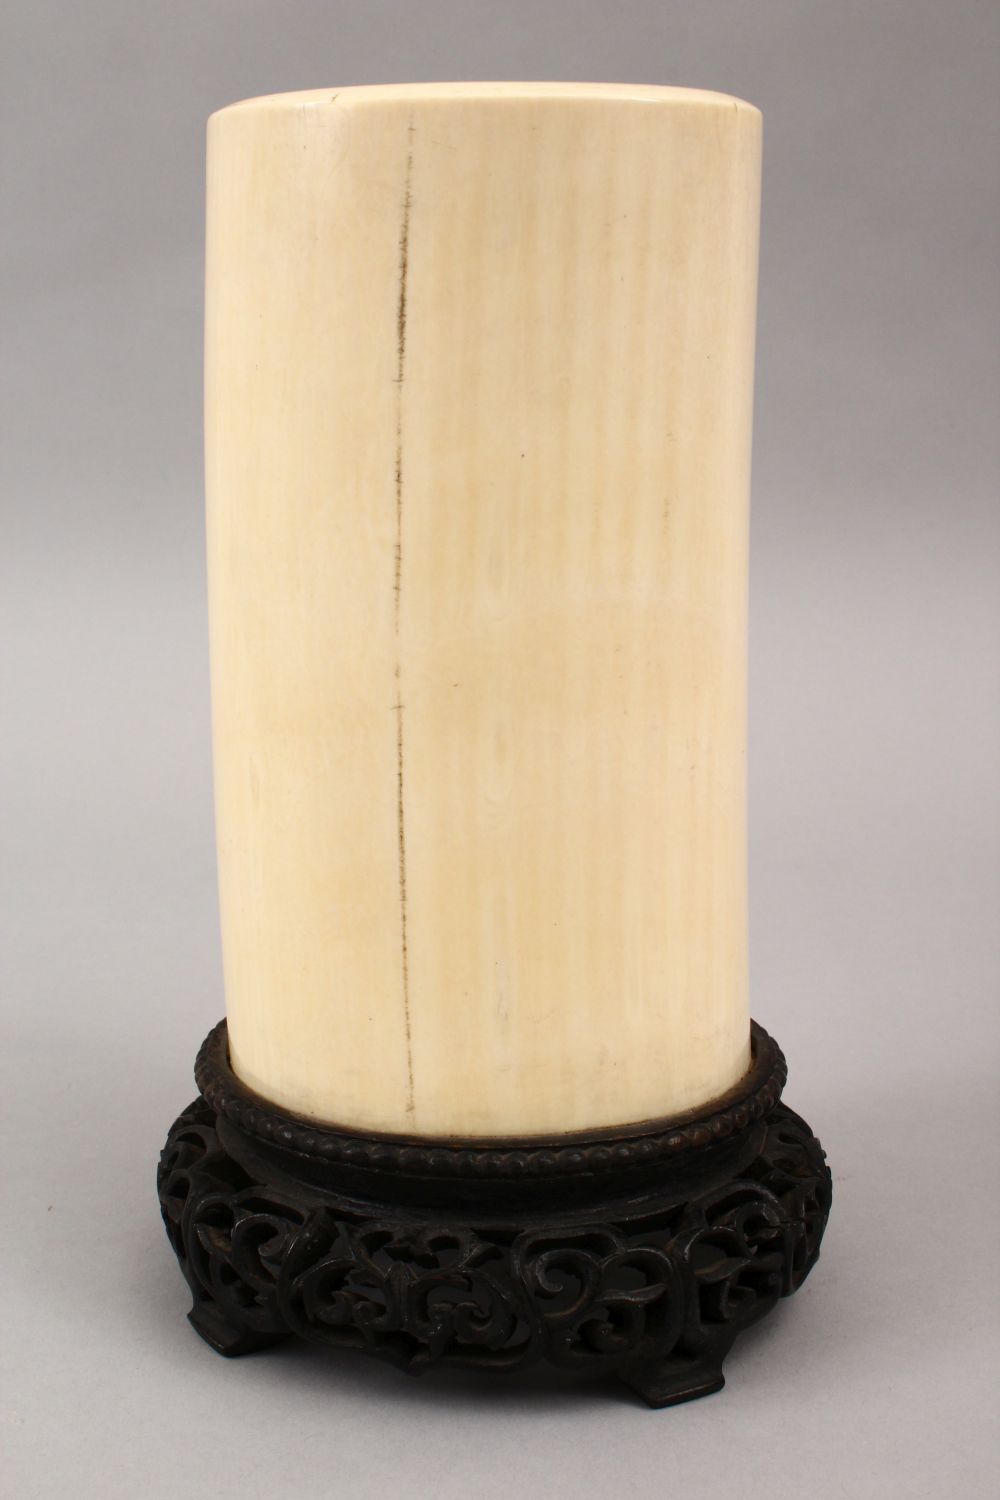 A GOOD CHINESE REPUBLIC PERIOD CARVED IVORY TUSK VASE ON STAND, the vase decorated with scenes of - Image 8 of 15